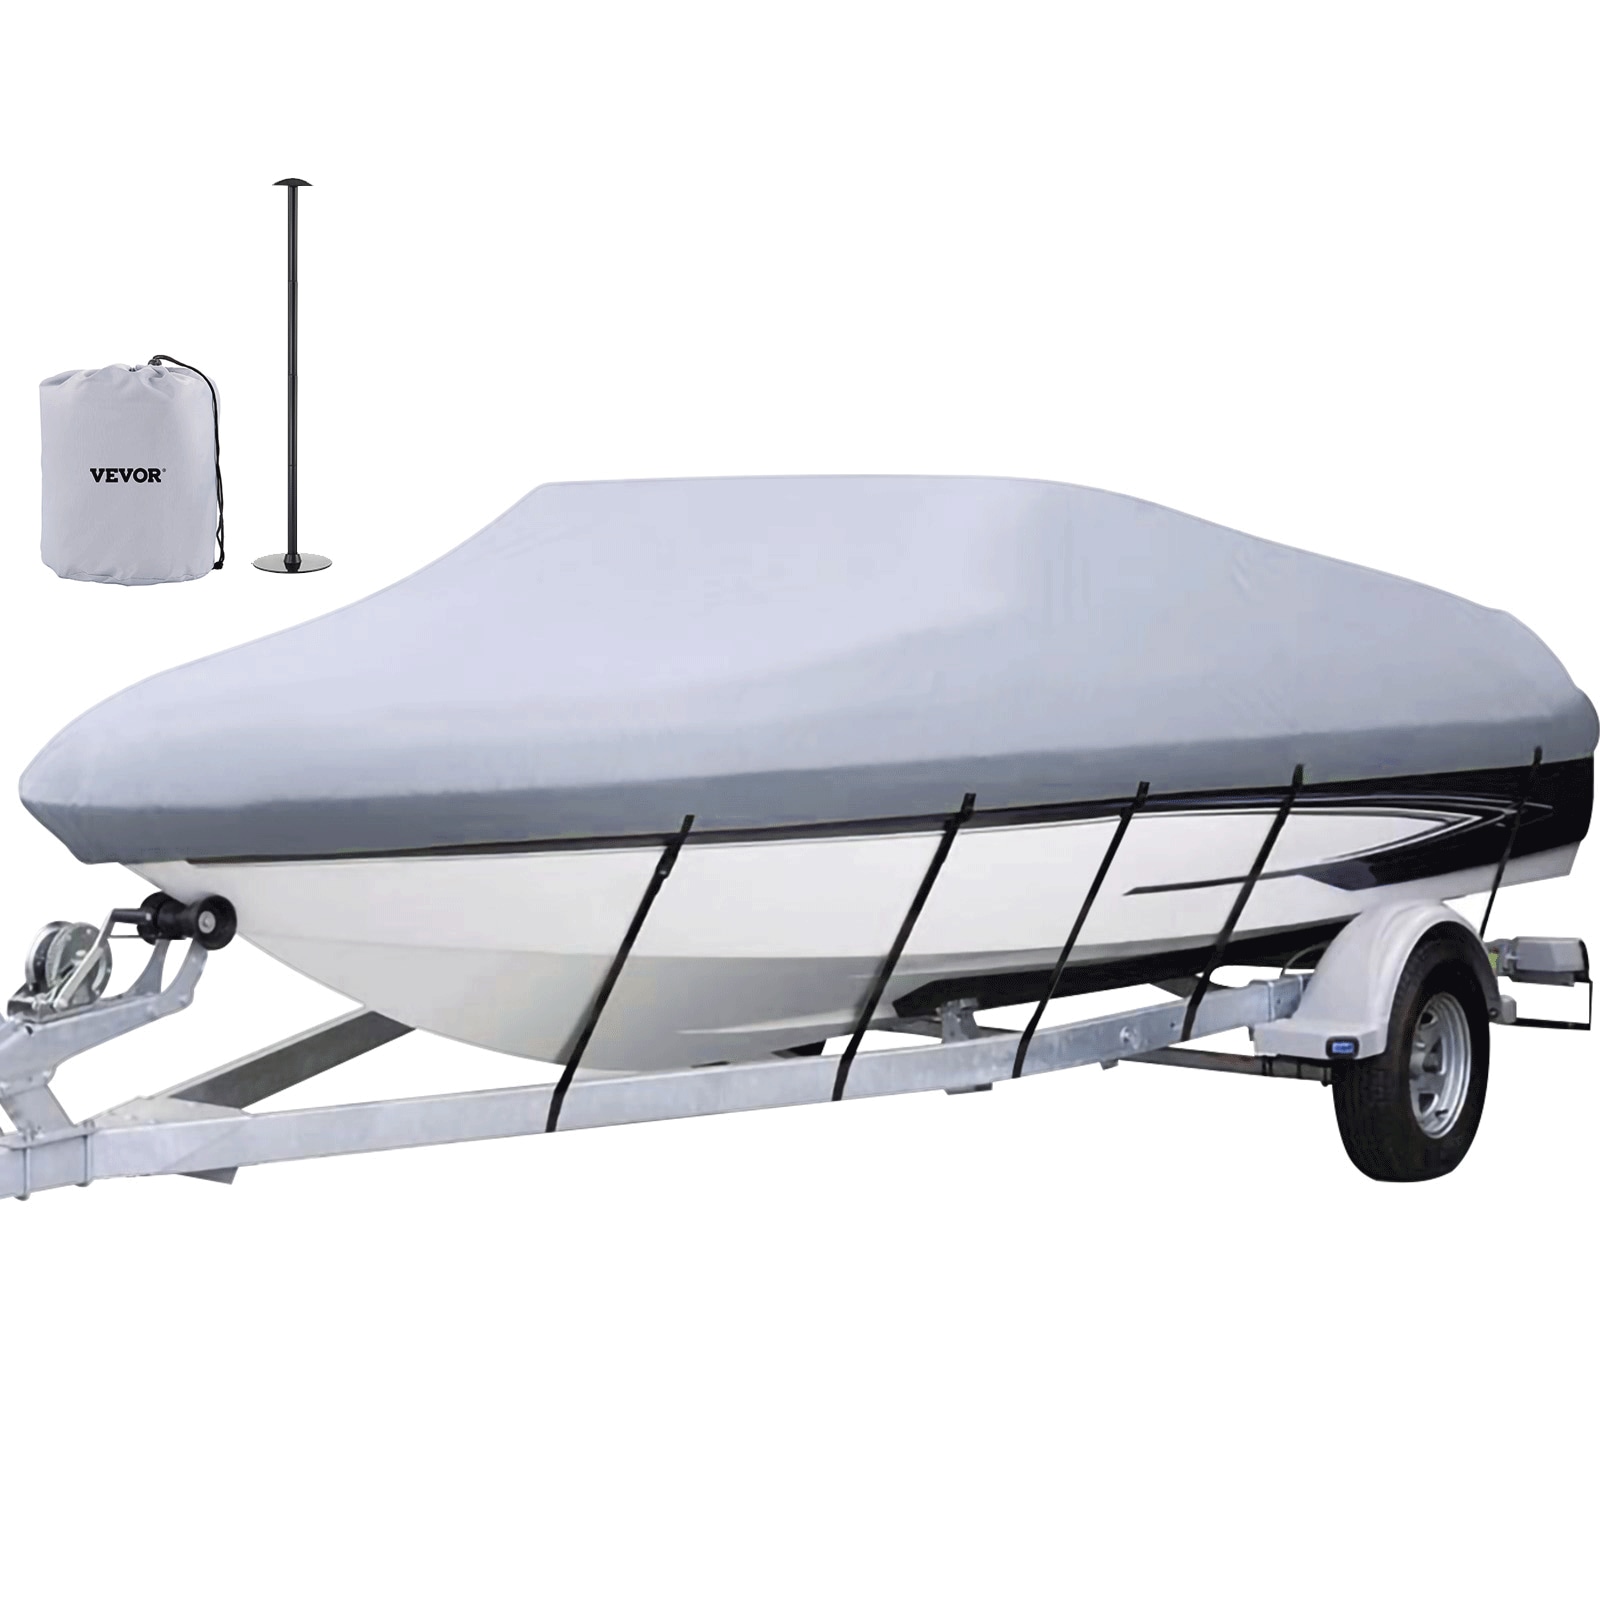 VEVOR 14-16 Ft Long Trailerable Boat Cover Pontoon Boat Cover 210d Oxford  Fabric in the Boat Covers & Bimini Tops department at